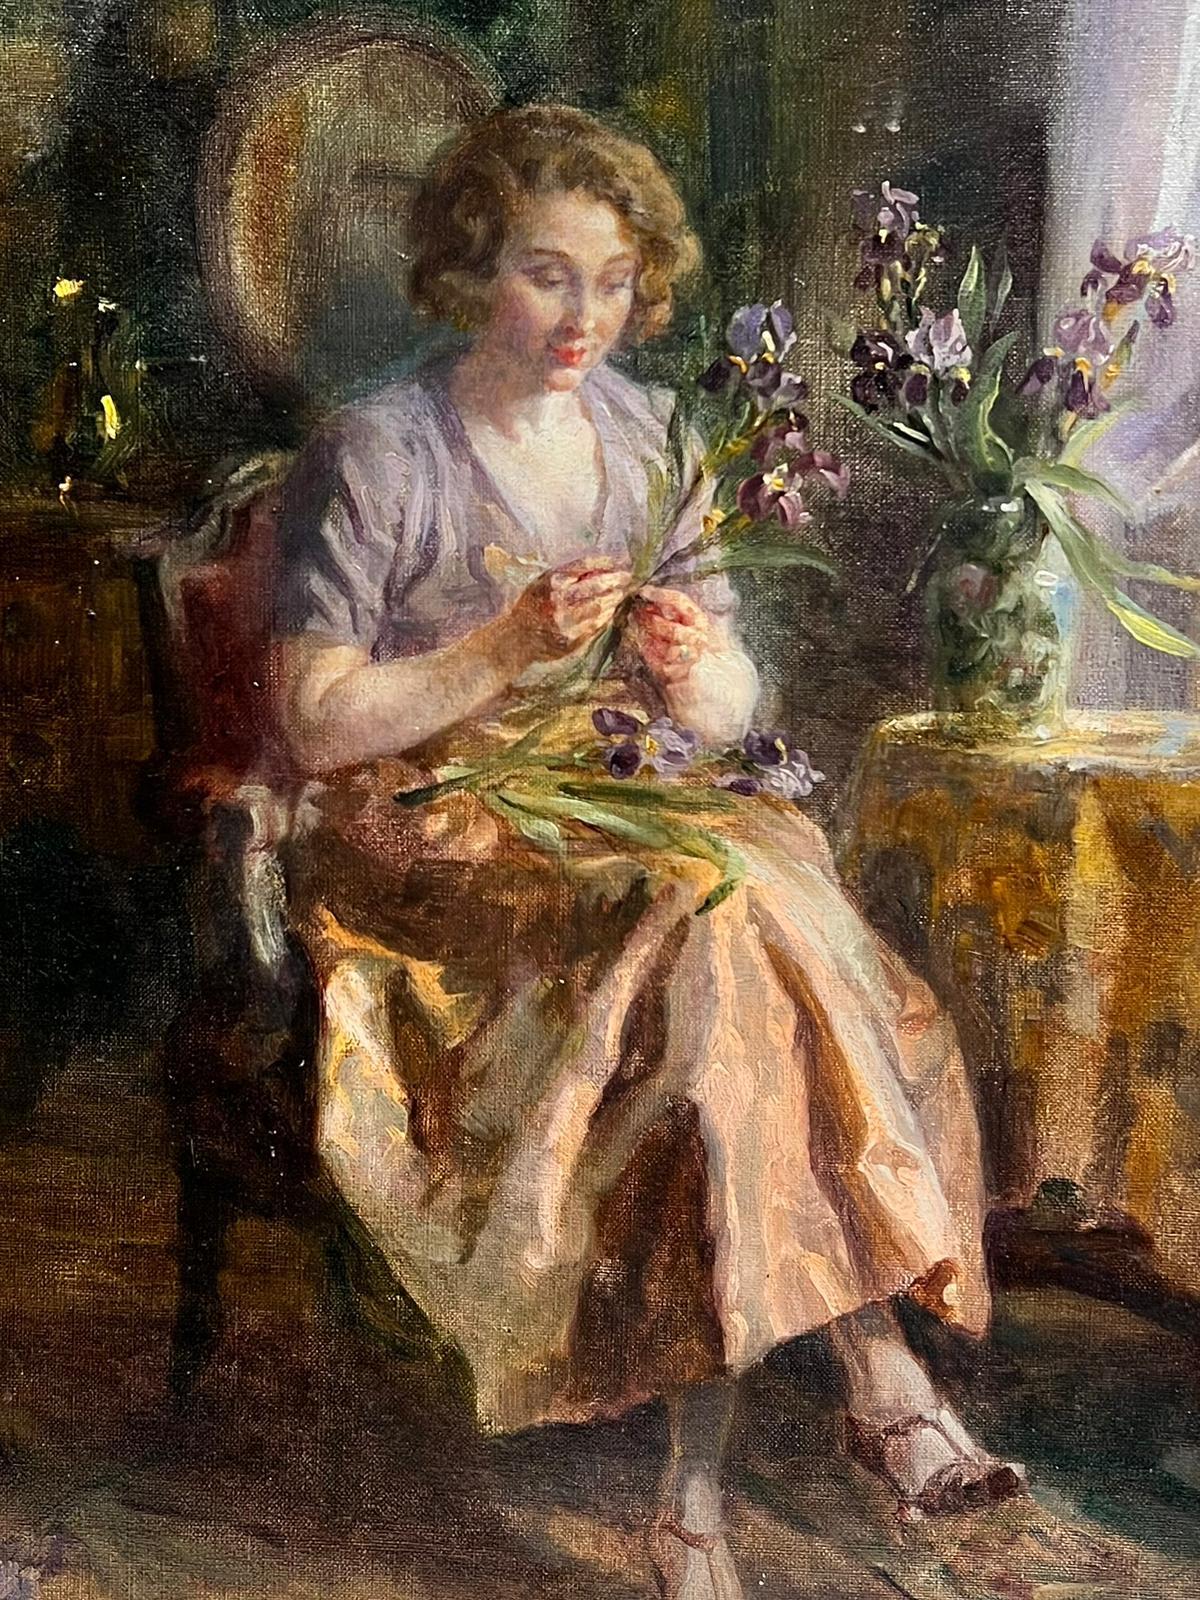 Flower Arranging
French School, indistinctly signed
late 19th century
oil on canvas ,unframed
canvas: 18 x 15 inches
the painting is in overall very good and sound condition